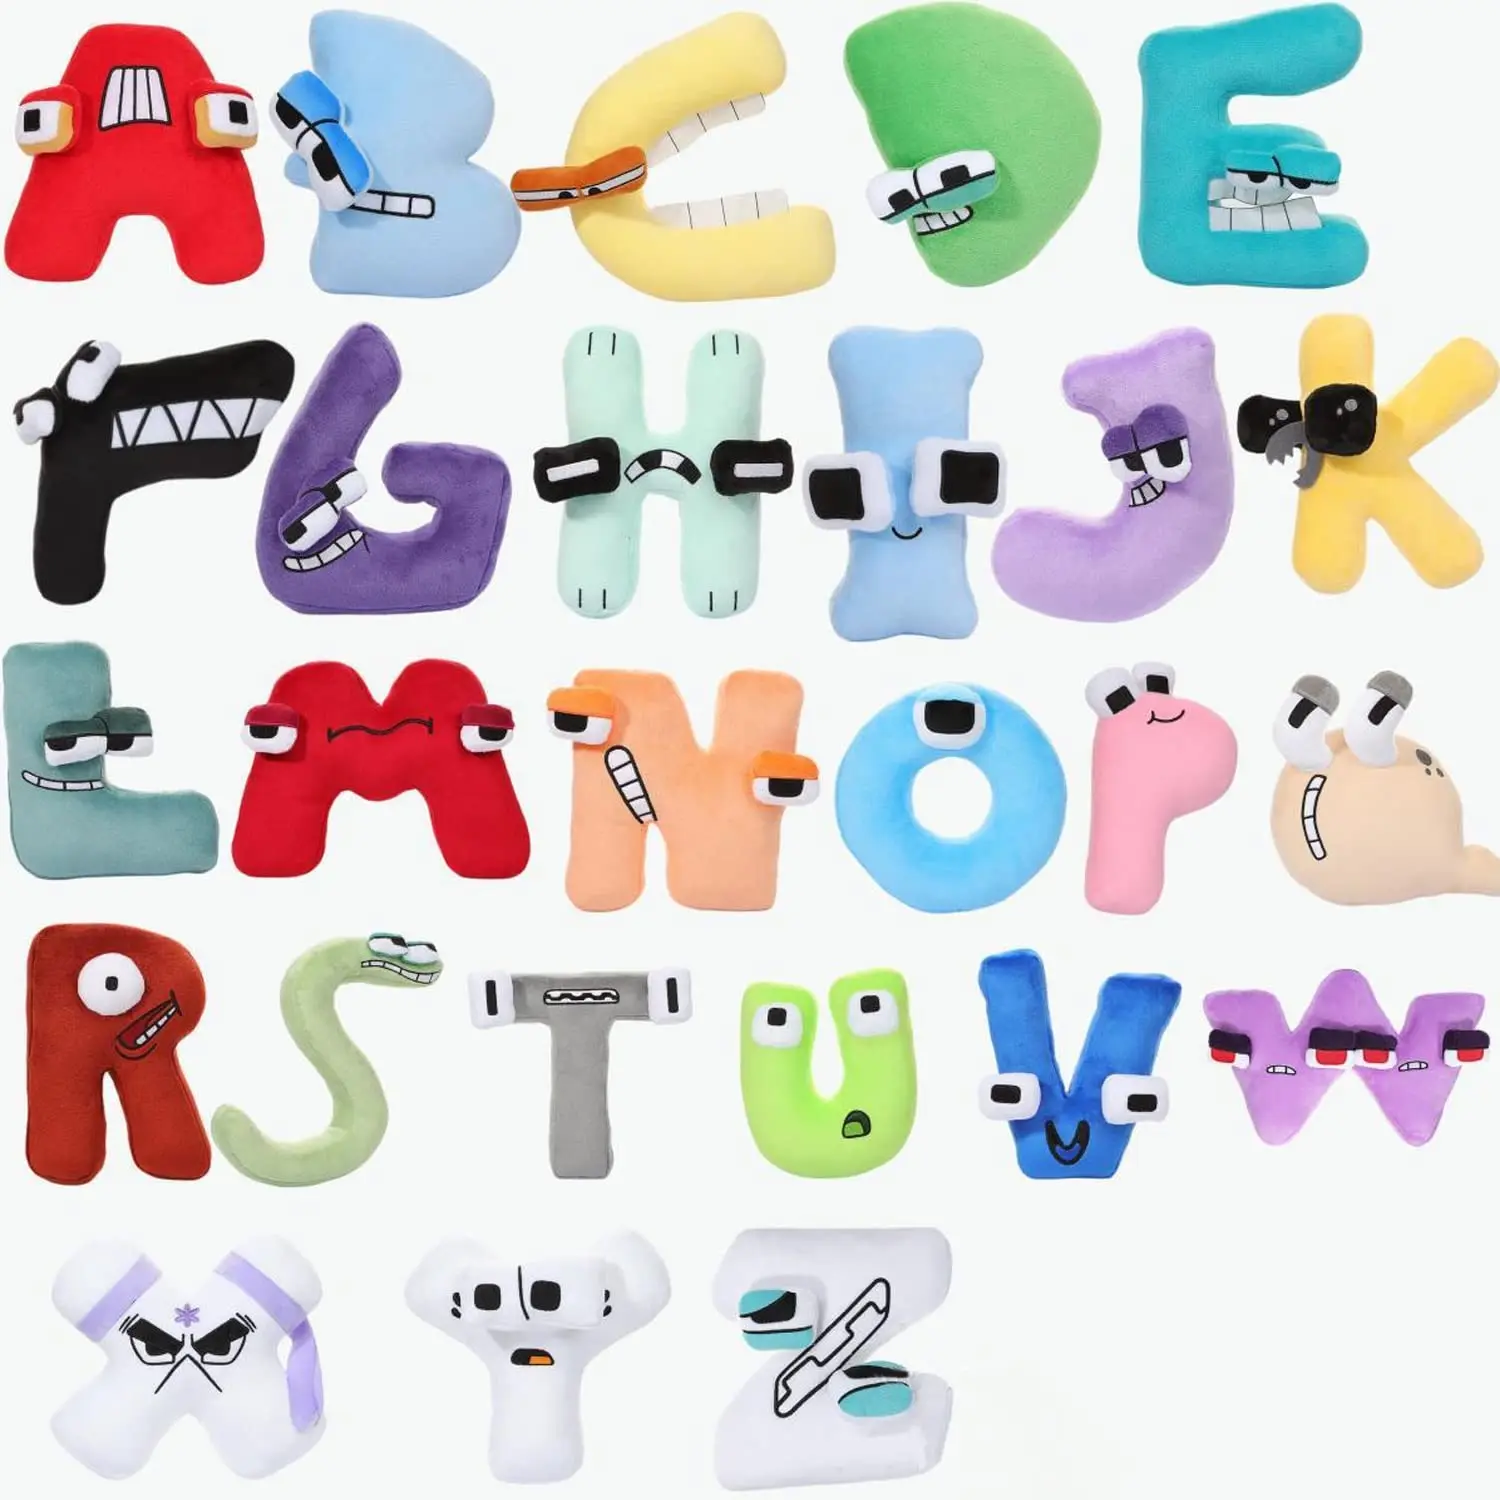 ALPHABET LORE RUSSIAN Letter Plush Toy Pillow Perfect Gift For